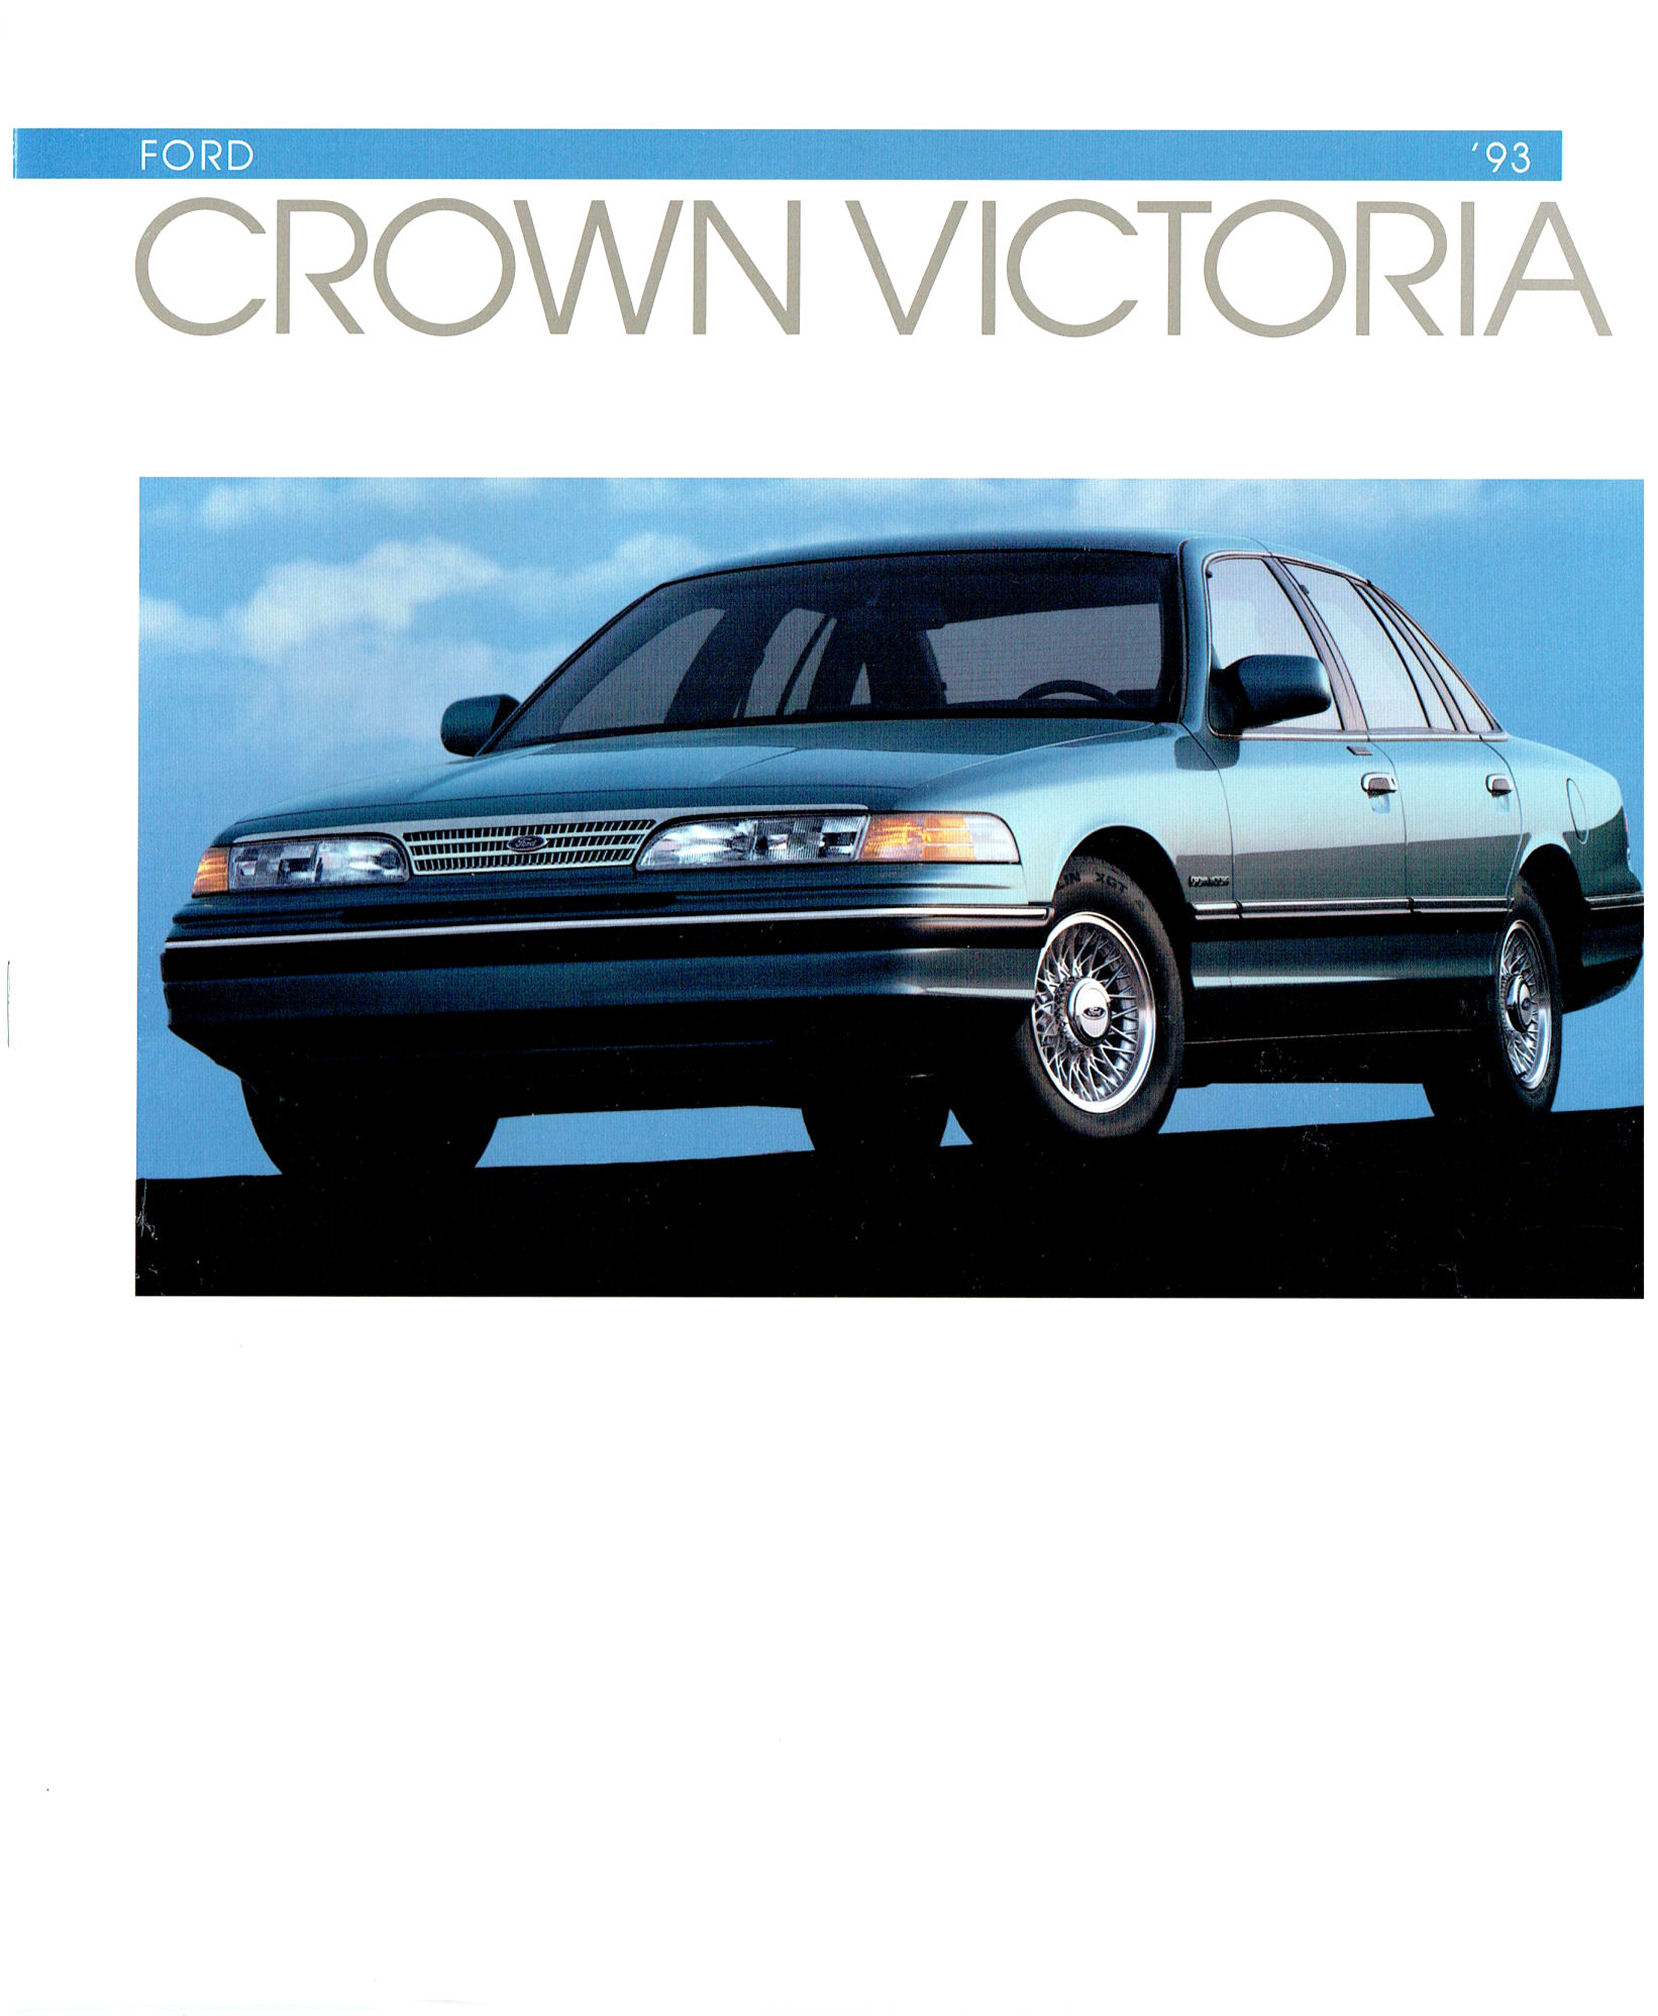 1993_Ford_Crown_Victoria-01